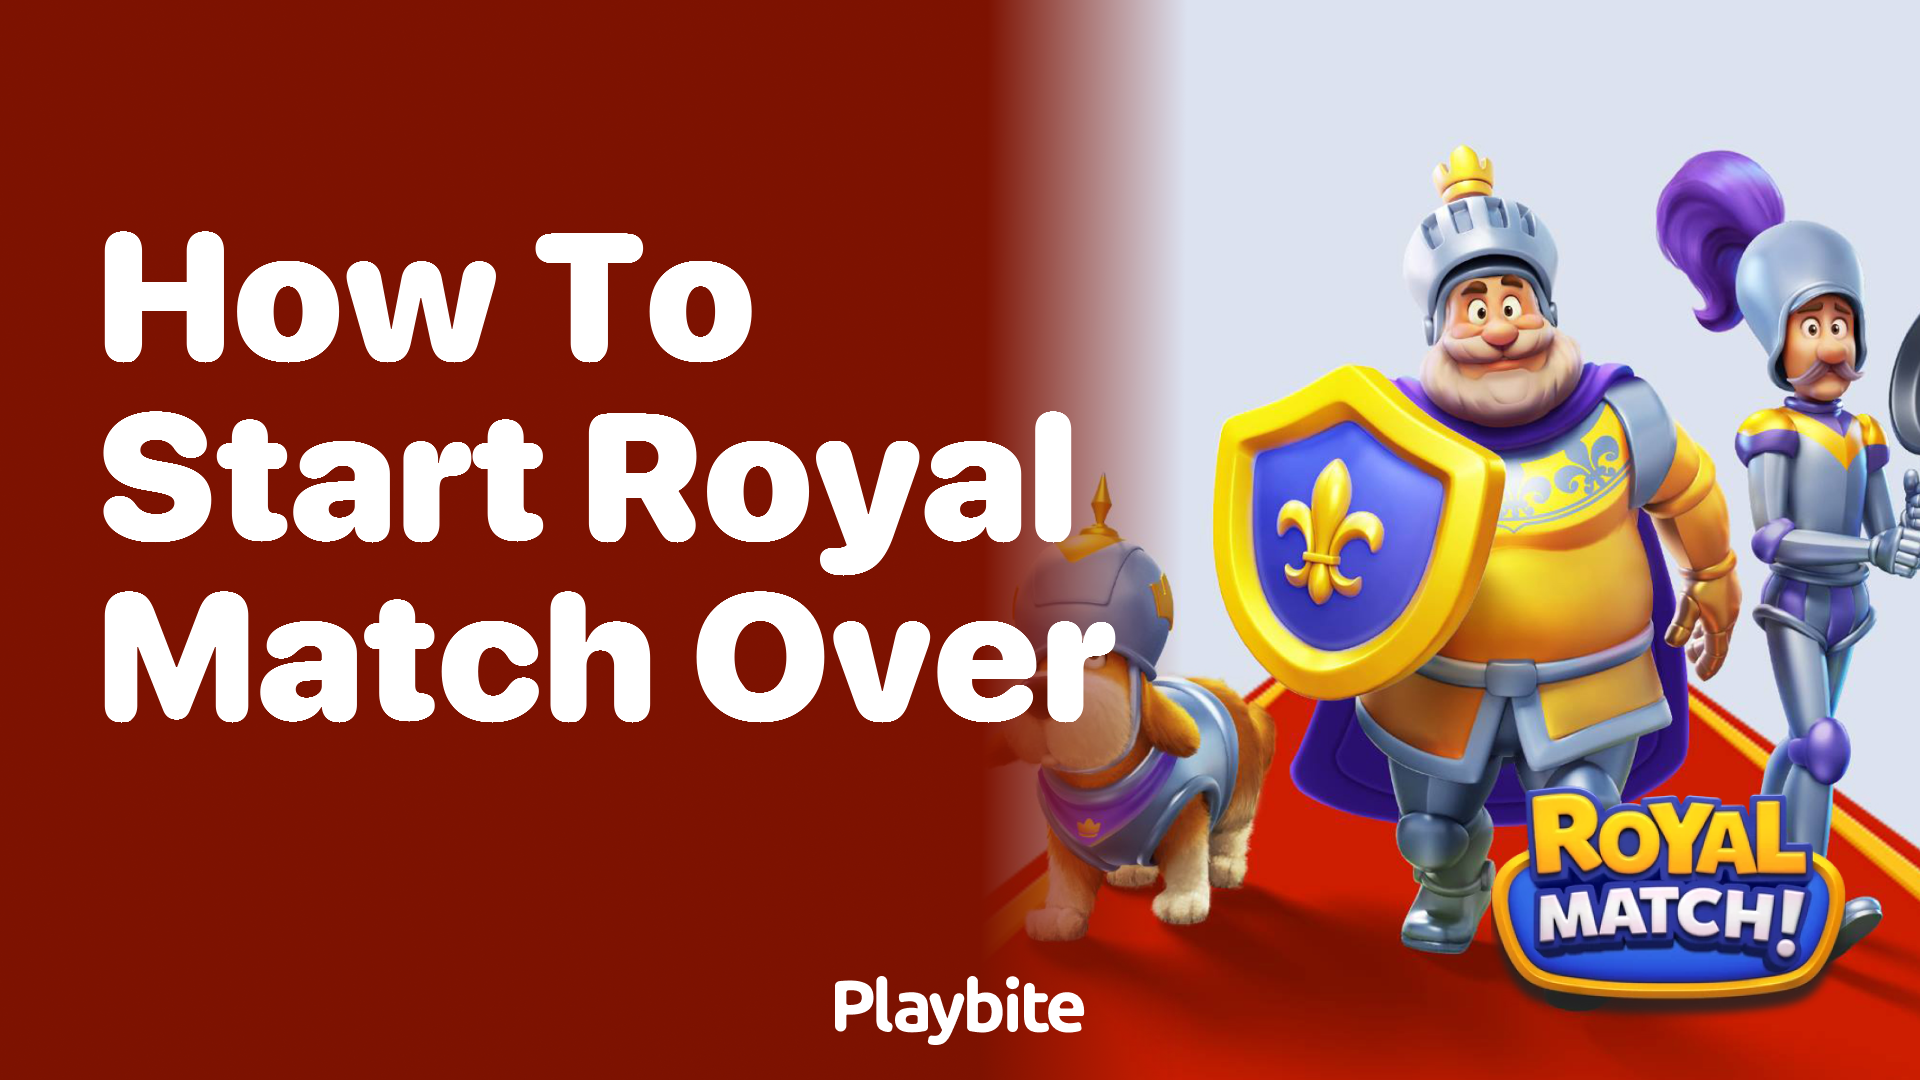 How to Start Royal Match Over: A Quick Guide